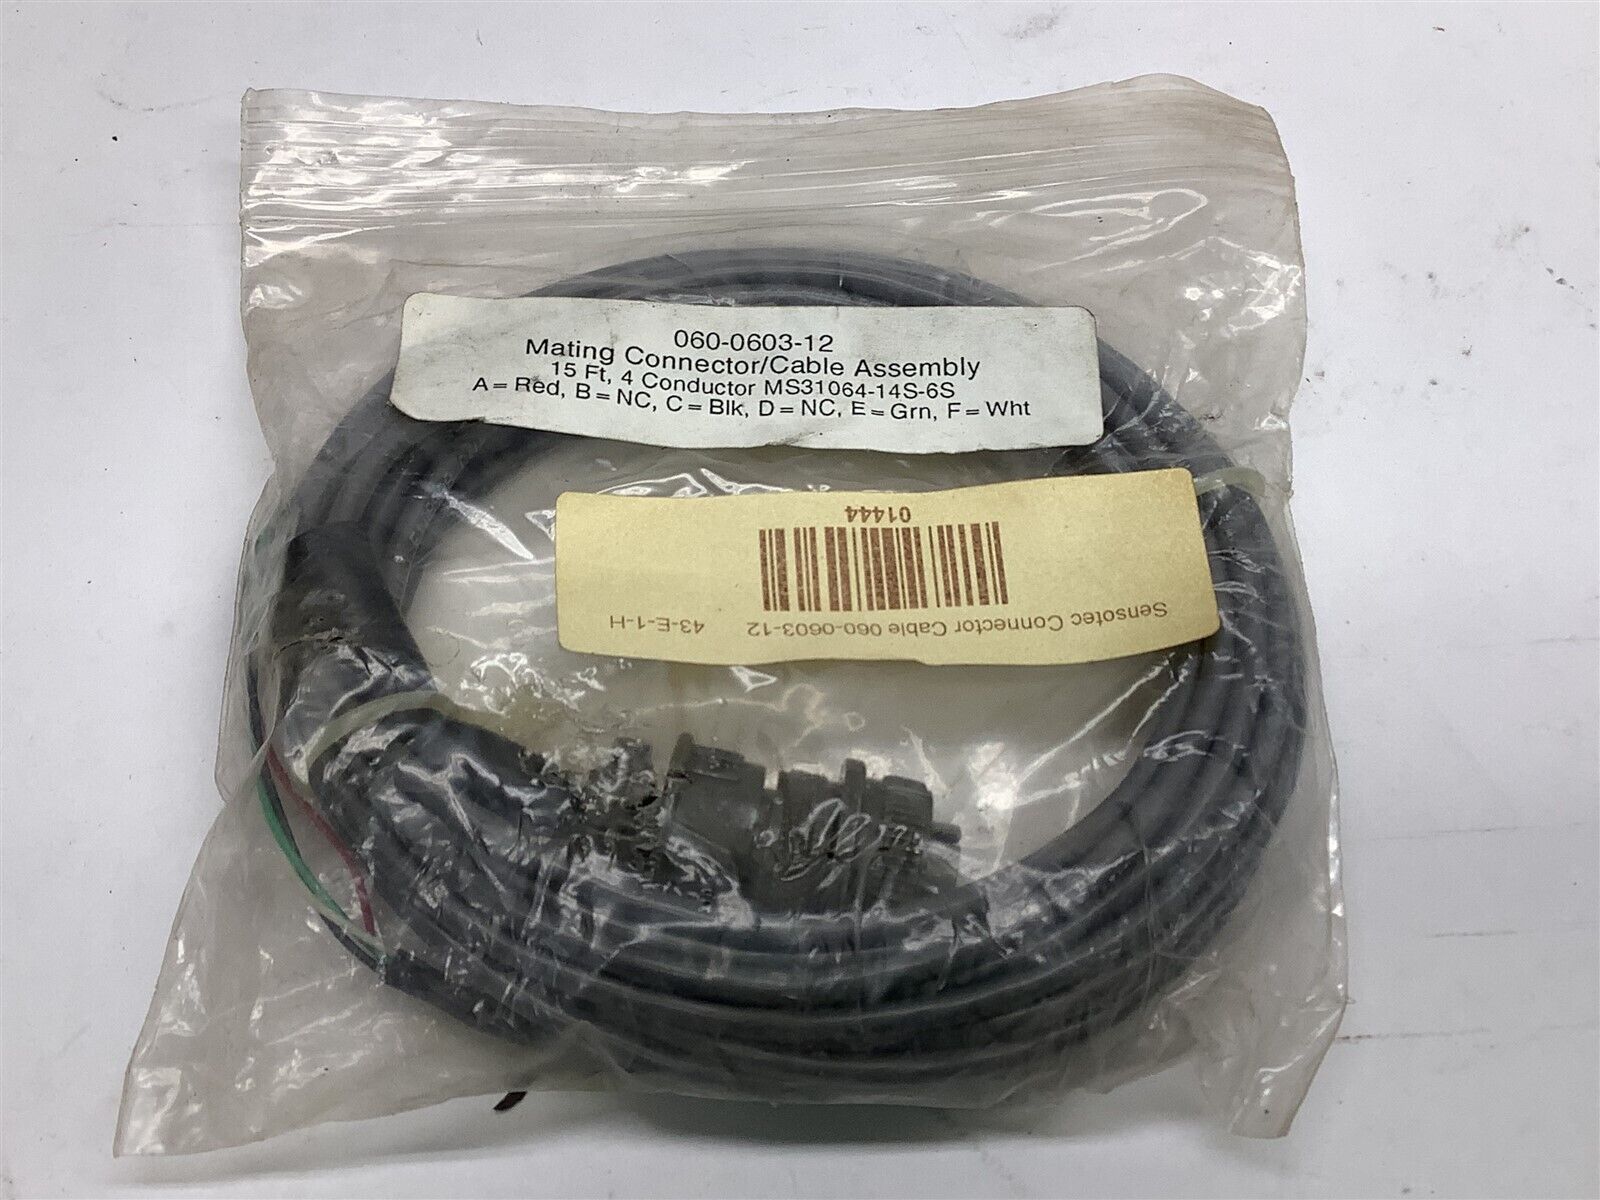 NEW IN BAG Sensotec / Honeywell 060-0603-12 Connector Cable W7-9